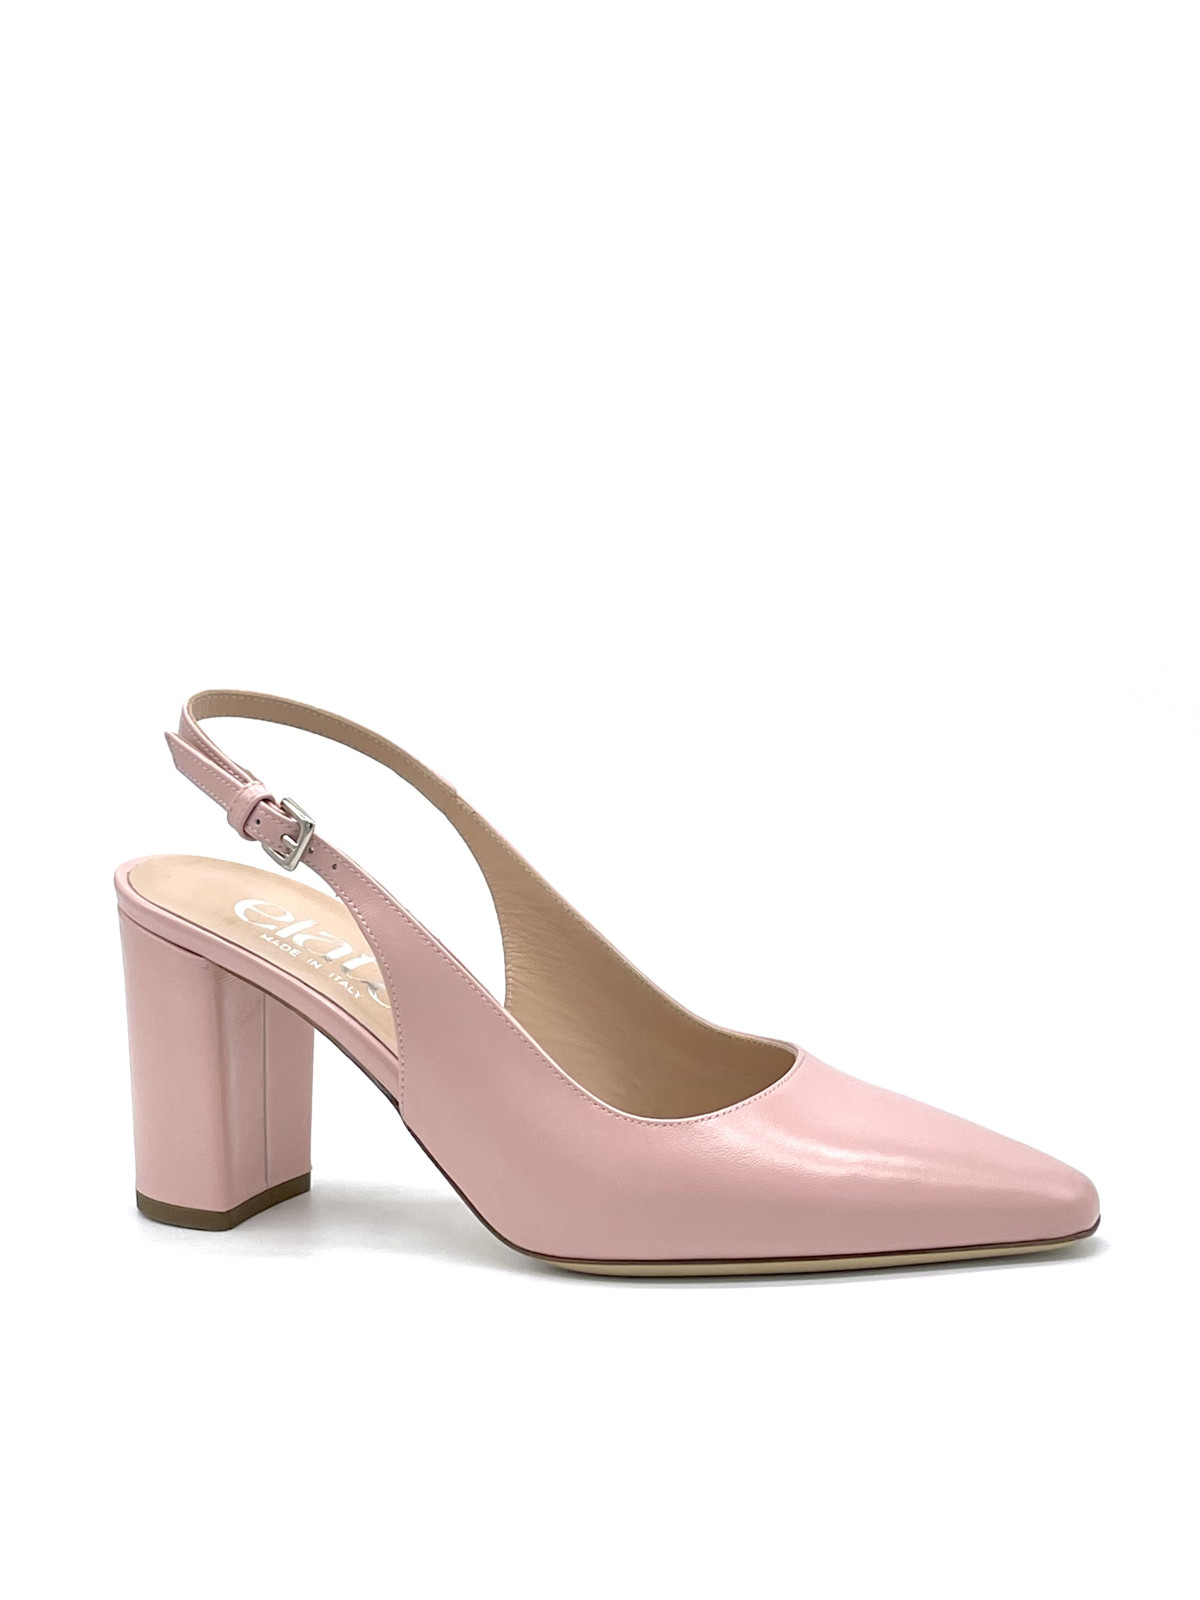 Pink leather slingback. Leather lining, leather sole. 7,5 cm heel.